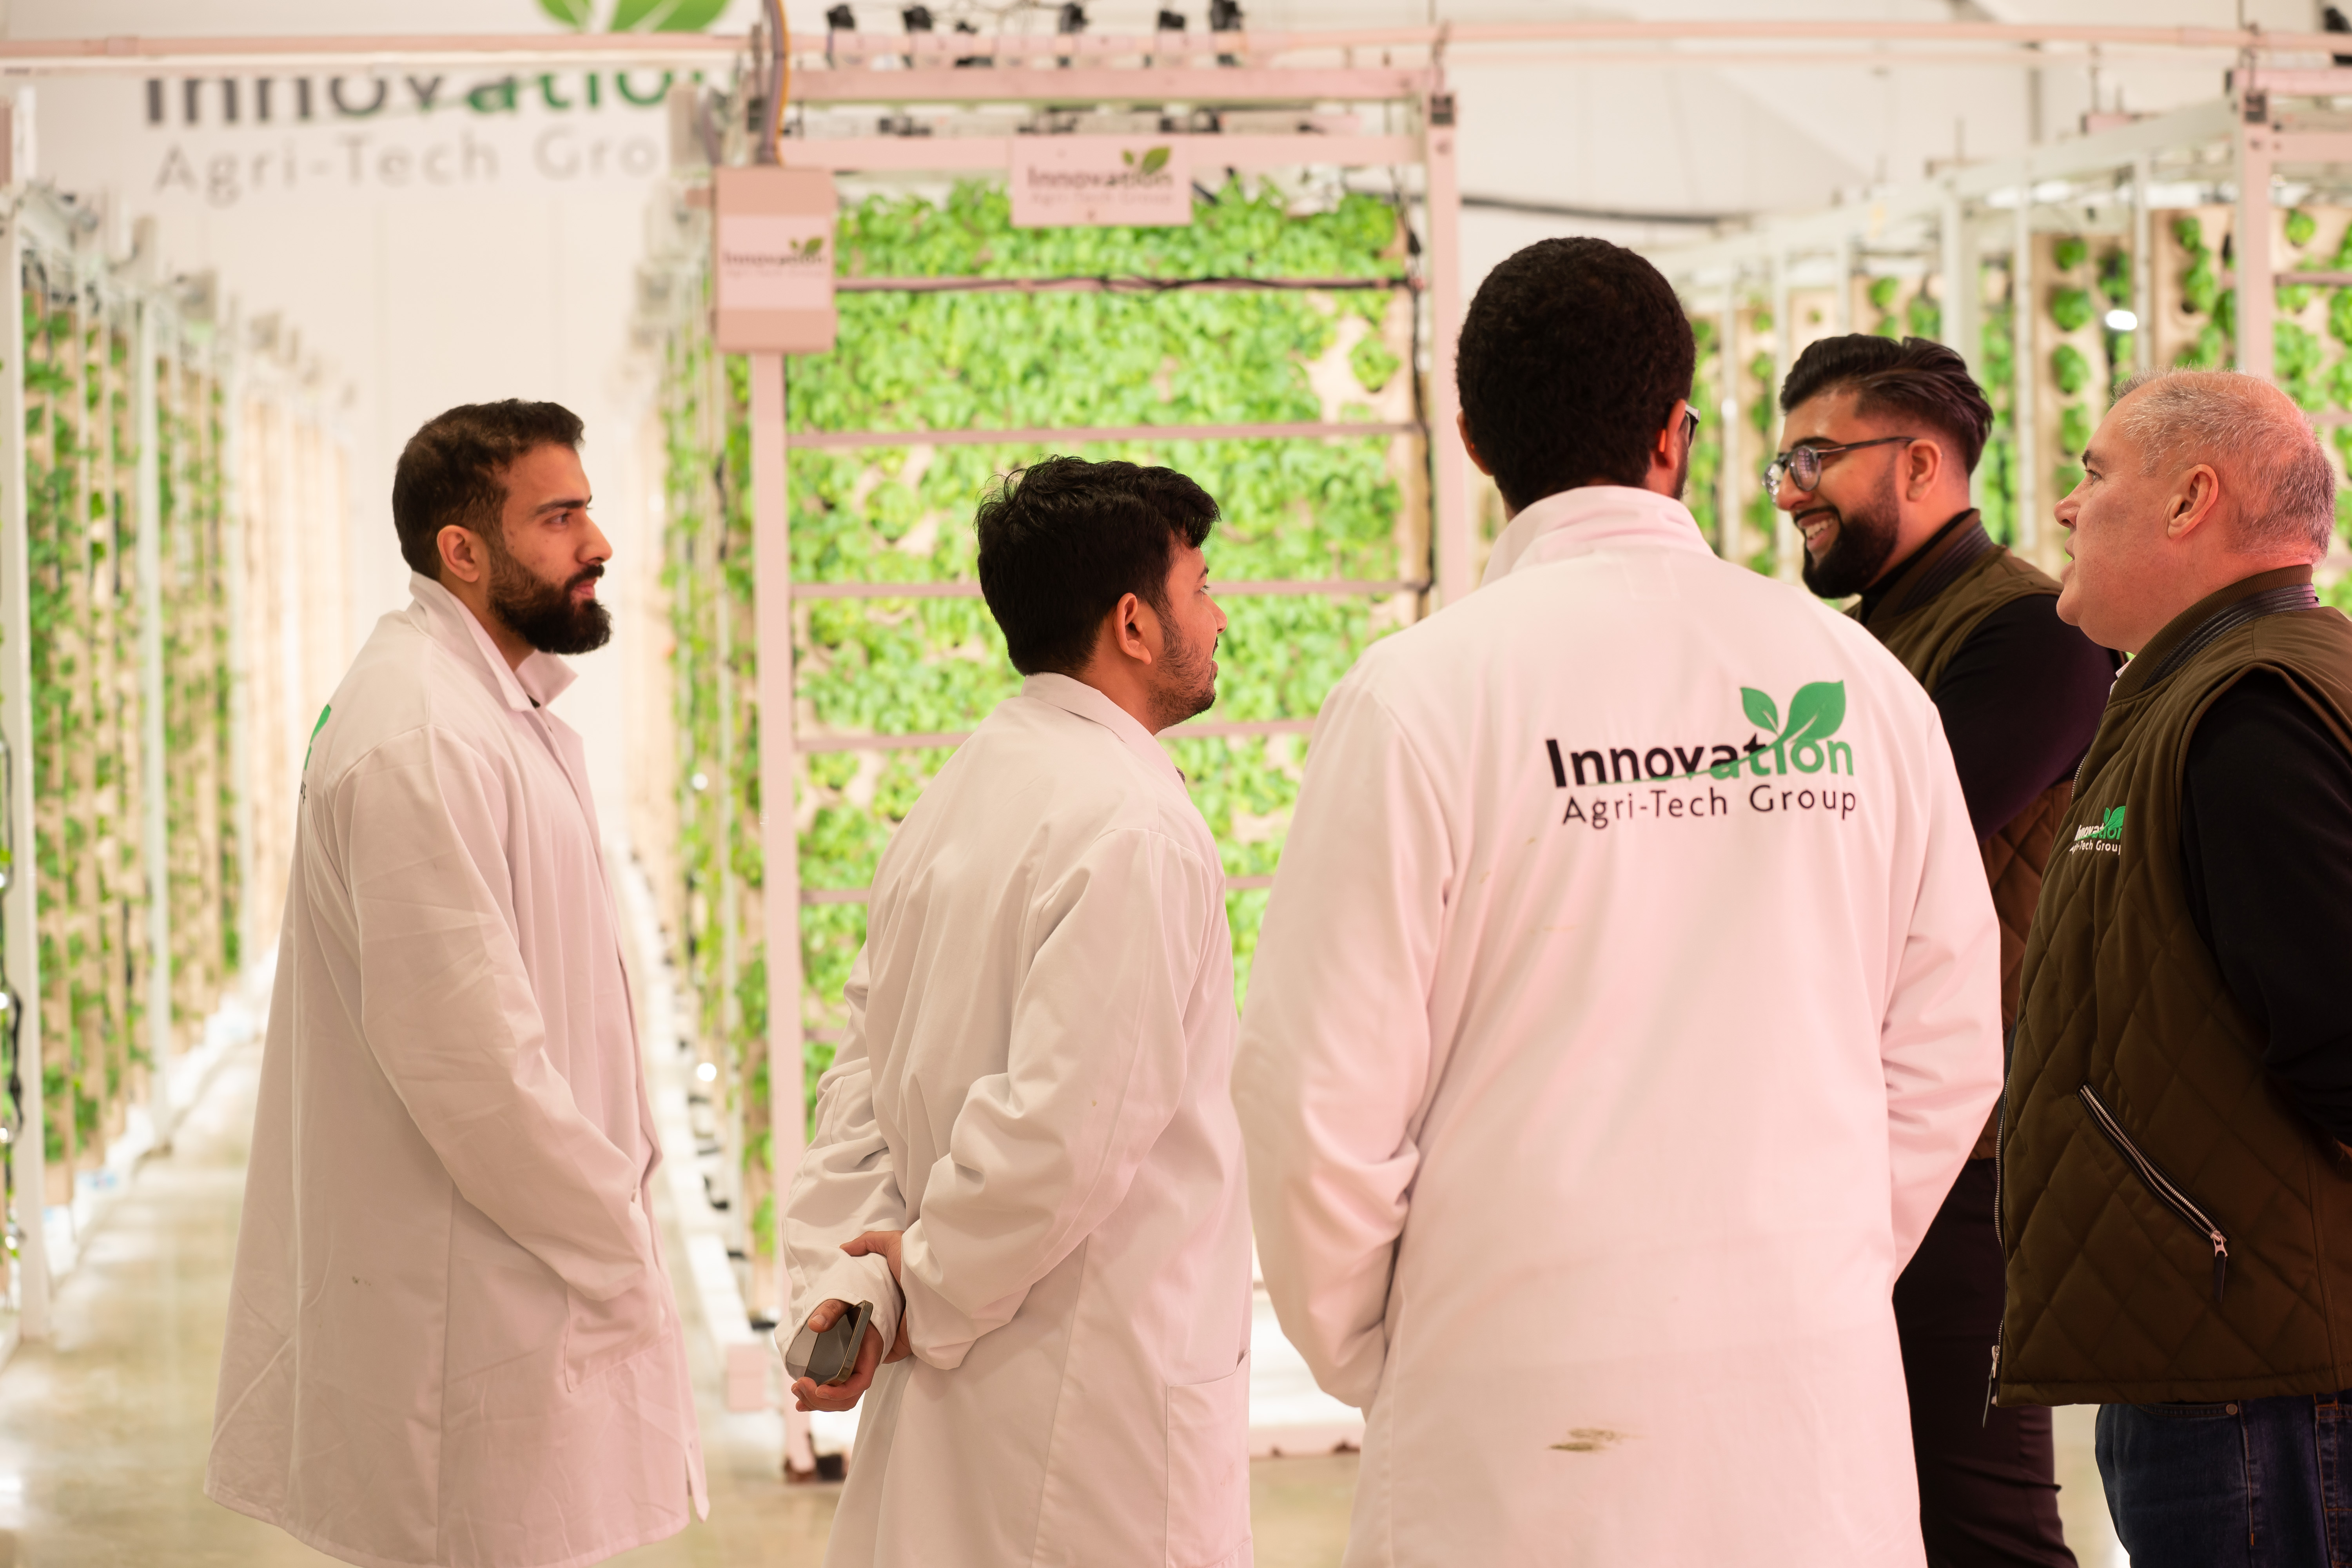 Innovation Agritech Group Appoints Global Sales Team To Transition  Business To Revenue